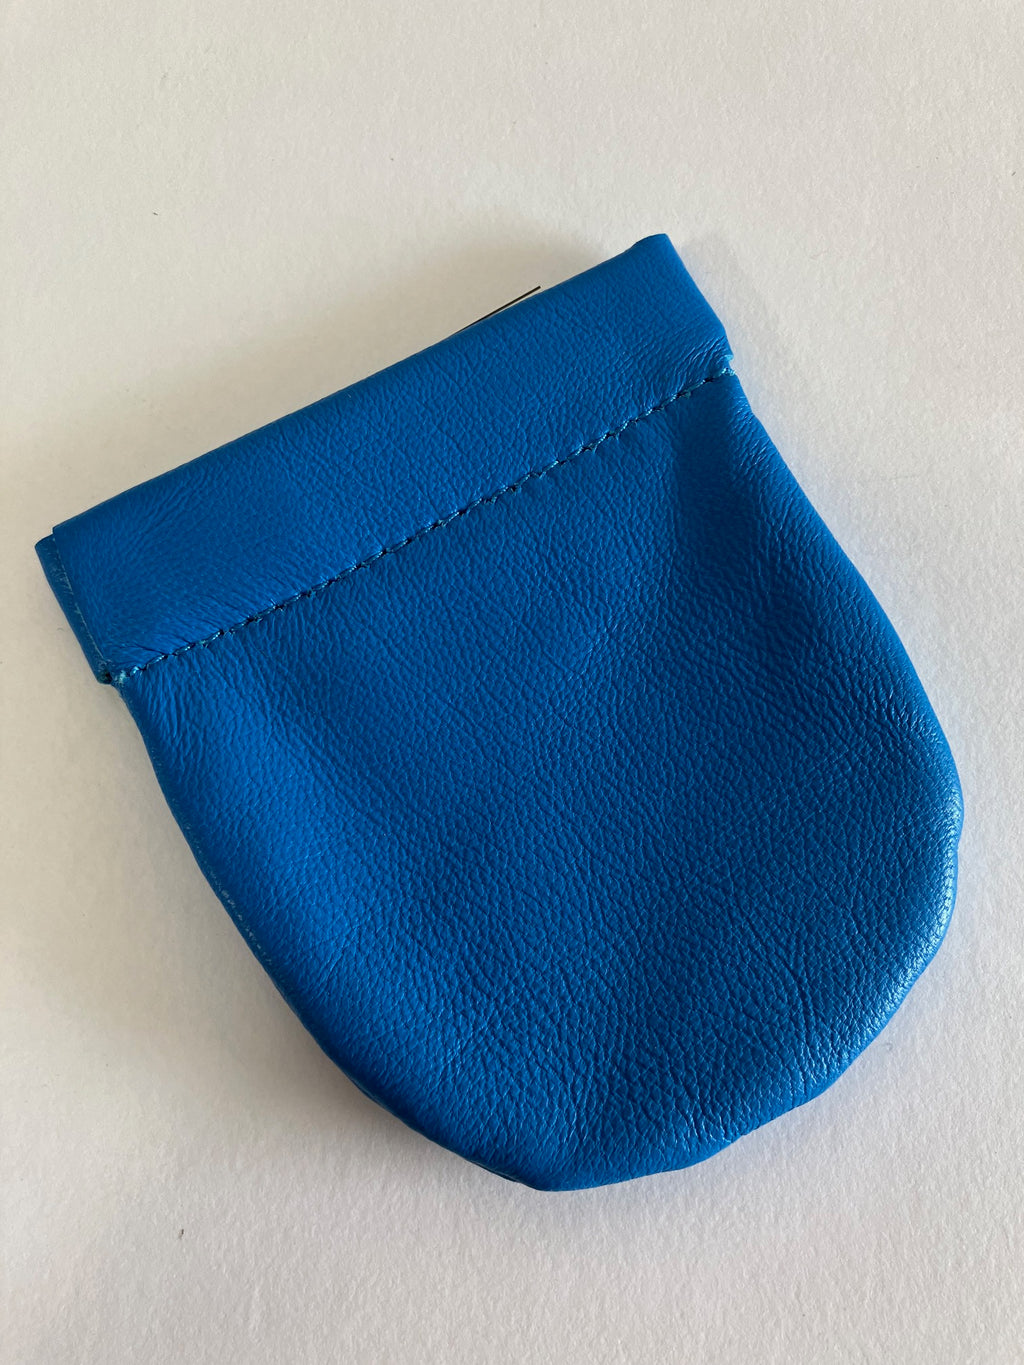 SAMPLE Leather wallet, squeeze frame coin purse royal blue